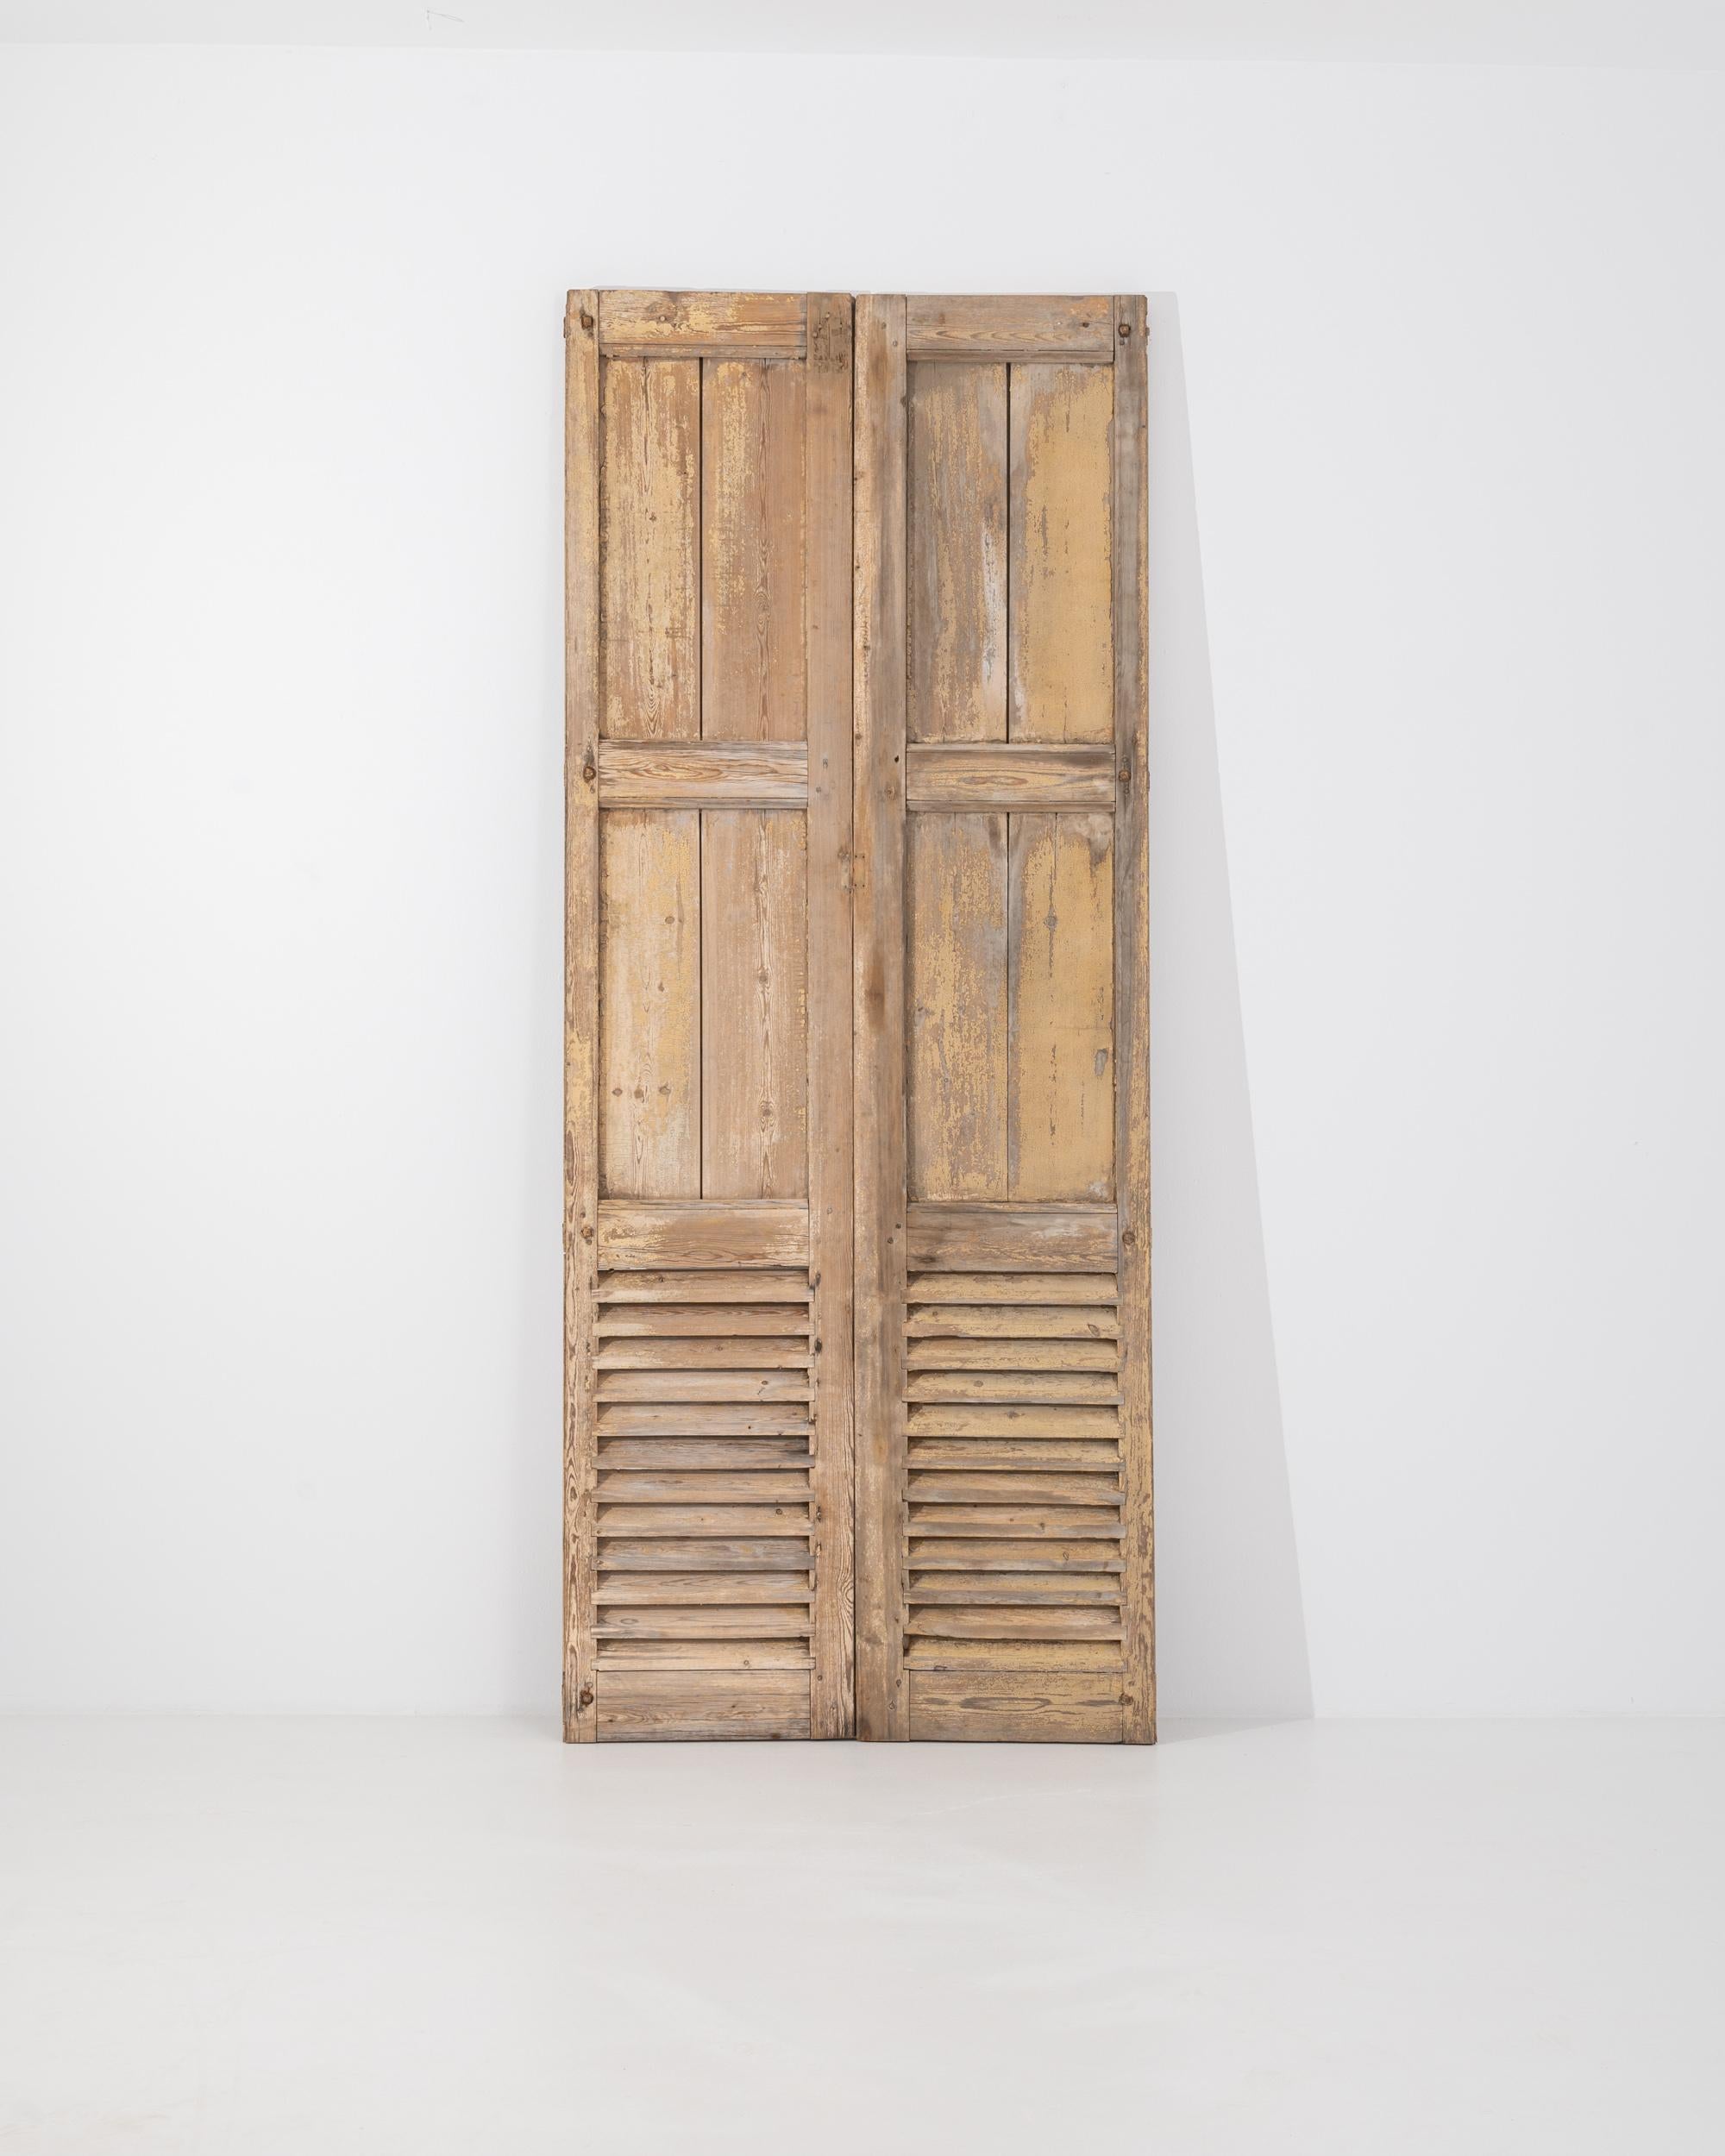 A pair of wood shutters from 19th century France. Standing at an impressive height, these vintage shutters impose their bravado while simultaneously emitting a welcoming warmth. A lively and colorful patina reflects their past life. This pair of